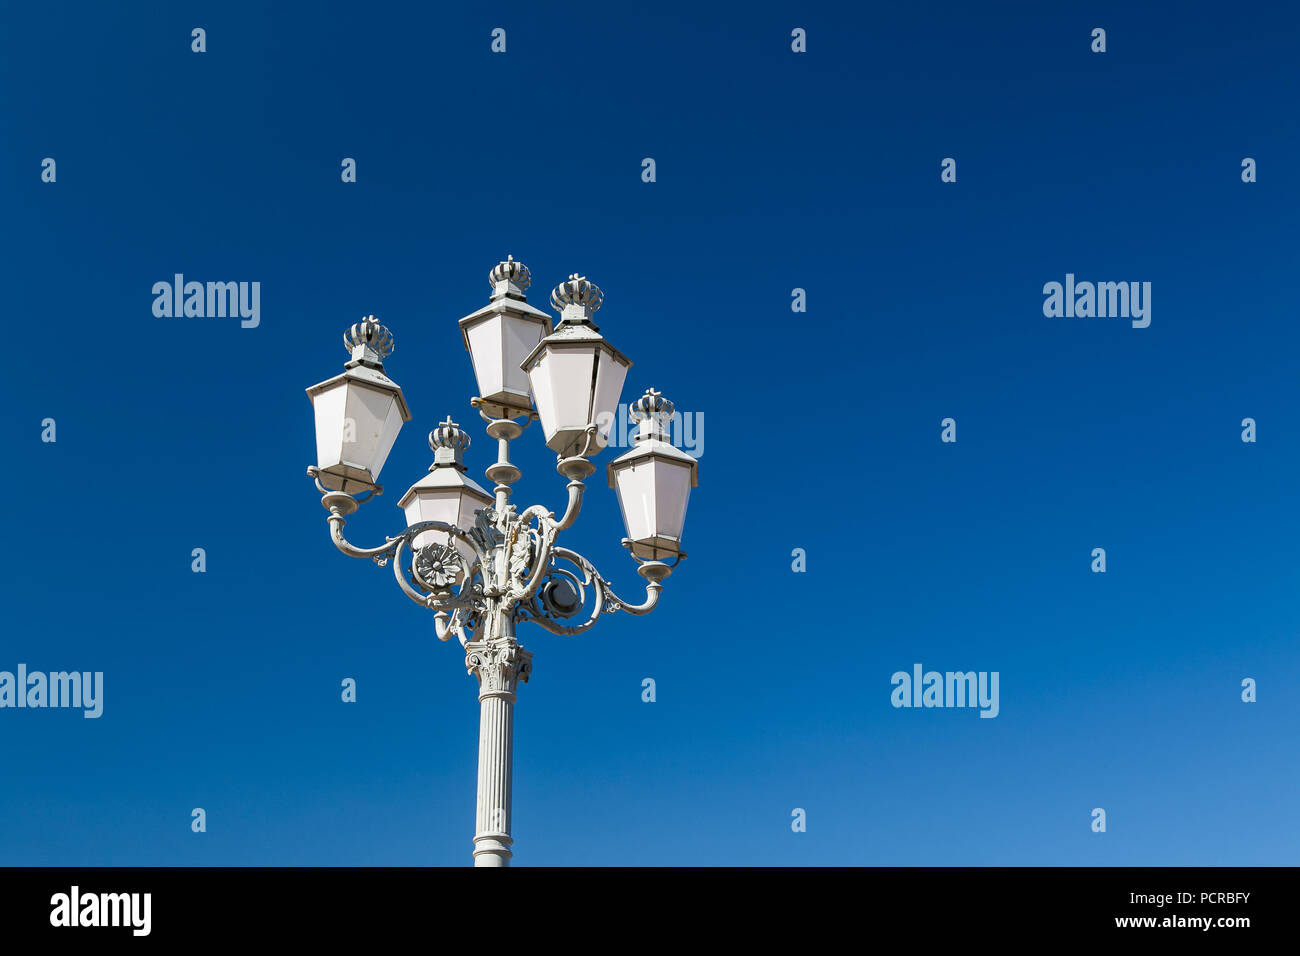 Decorative lamppost with multiple lanterns in broad day light. Stock Photo